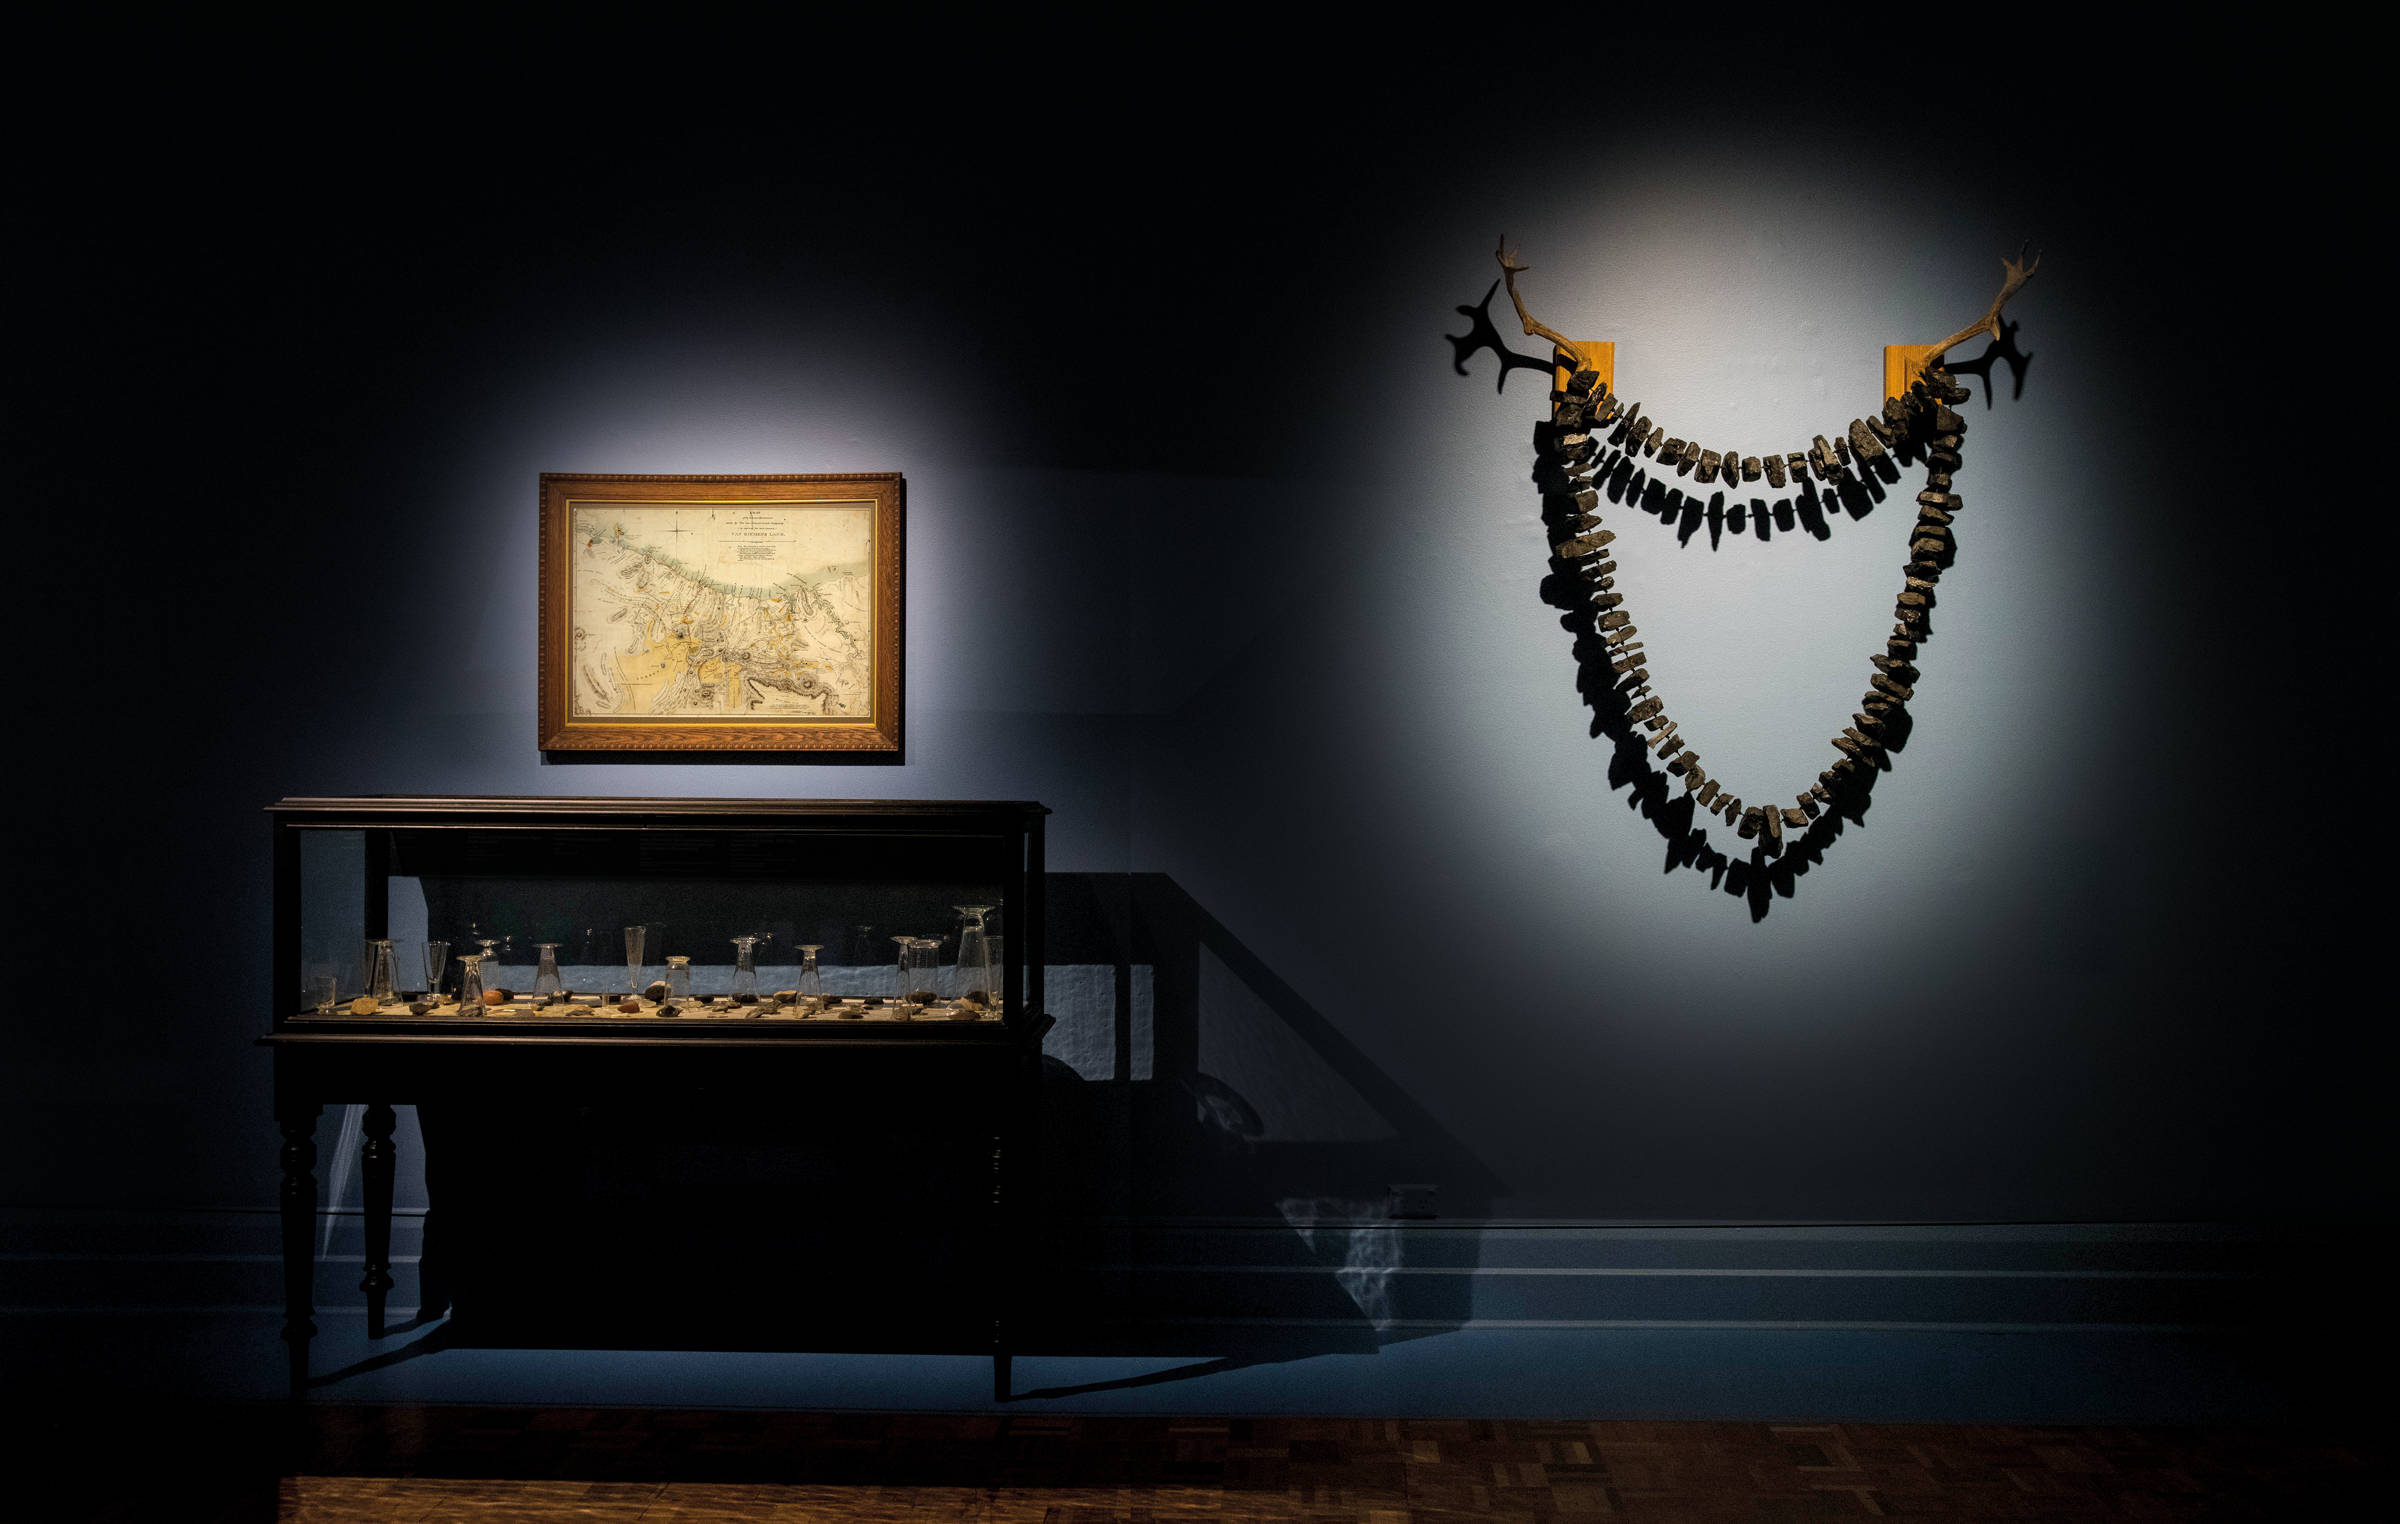 TENSE PAST exhibition image by Alistair Bett depicting two artworks. On the left-hand side of the image is a multi-form installation work titled, ‘North Down’ (2019). This work incorporates a colonial era cabinet filled with various Tasmanian Aboriginal stone tools collected from the Northdown, colonial property in Tasmania and a collection of Victorian era apothecary measuring glasses. Hanging above the cabinet is an historic map drafted in 1828 by Henry Hellyer (1790–1832) titled, ‘Map of the Interior Discoveries made by the Van Diemen’s Land Company (in exploring their location) Van Diemen’s Land 1828’. Inside the cabinet (but not visible), is a sketchbook of watercolour drawings by Thomas Scott titled, Sketches, ‘Van Diemen’s Land 1822–1847’, with the inscription ‘From North Down Hill to the Beach at Port Sorell…’ On the right-hand side of the image, hanging on the wall is a sculptural work titled, ‘Killymoon’ (2008). This large 3-D work is representative of an over-sized necklace made from lumps of Fingal Valley coal, hanging from fallow deer antlers on wooden fixing points.